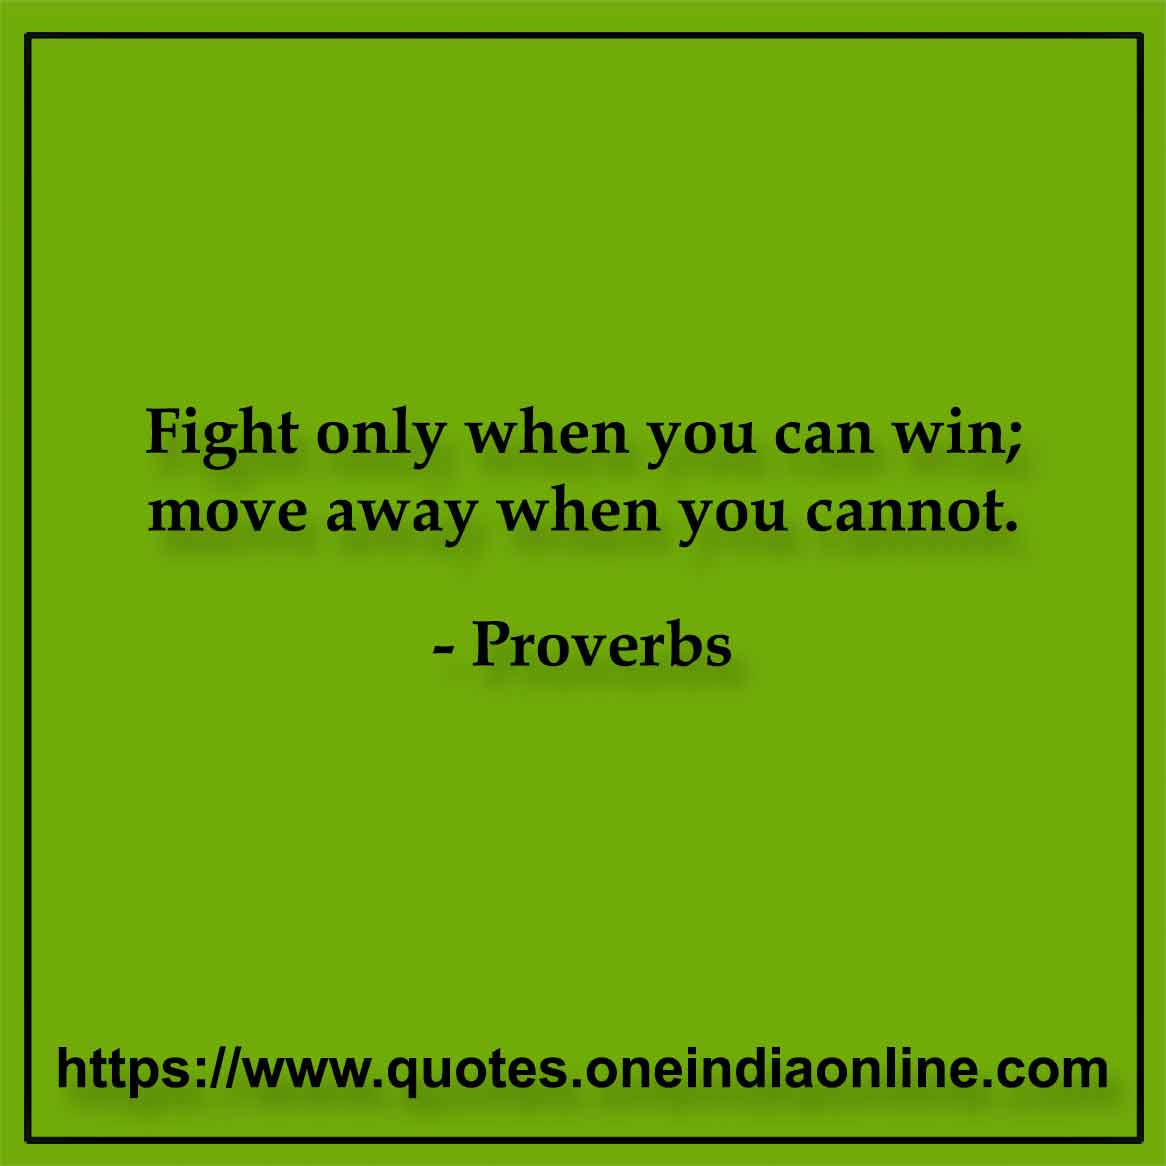 Fight only when you can win; move away when you cannot.

